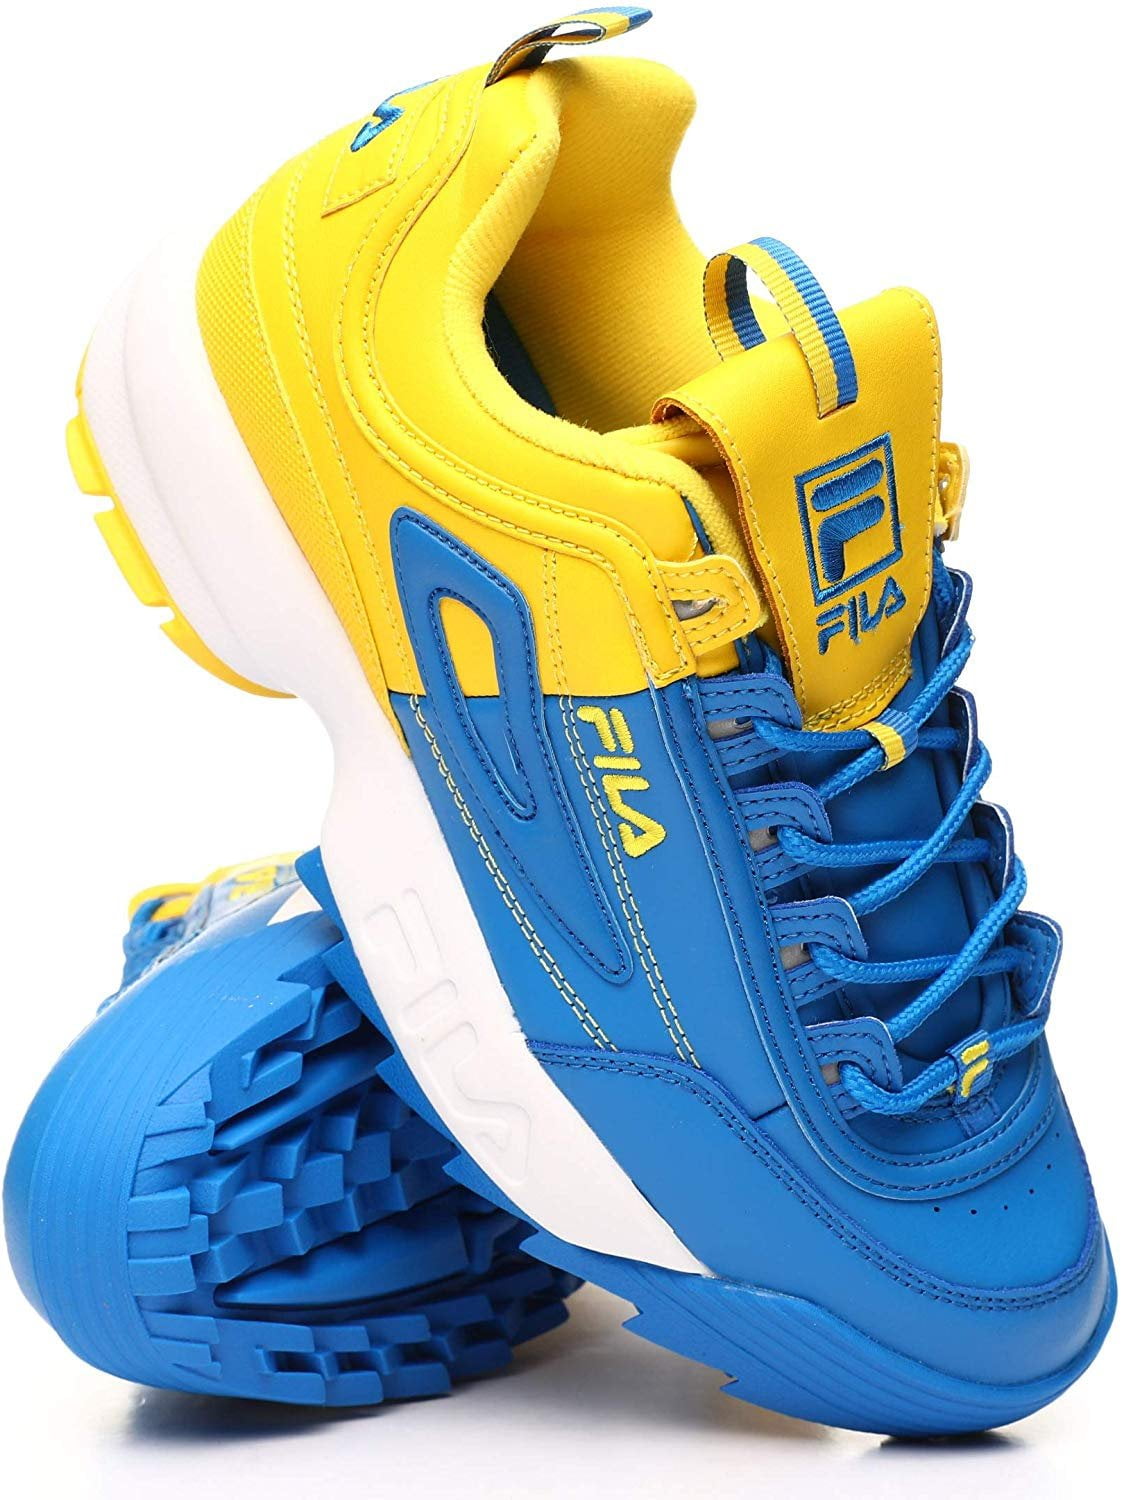 blue and yellow filas